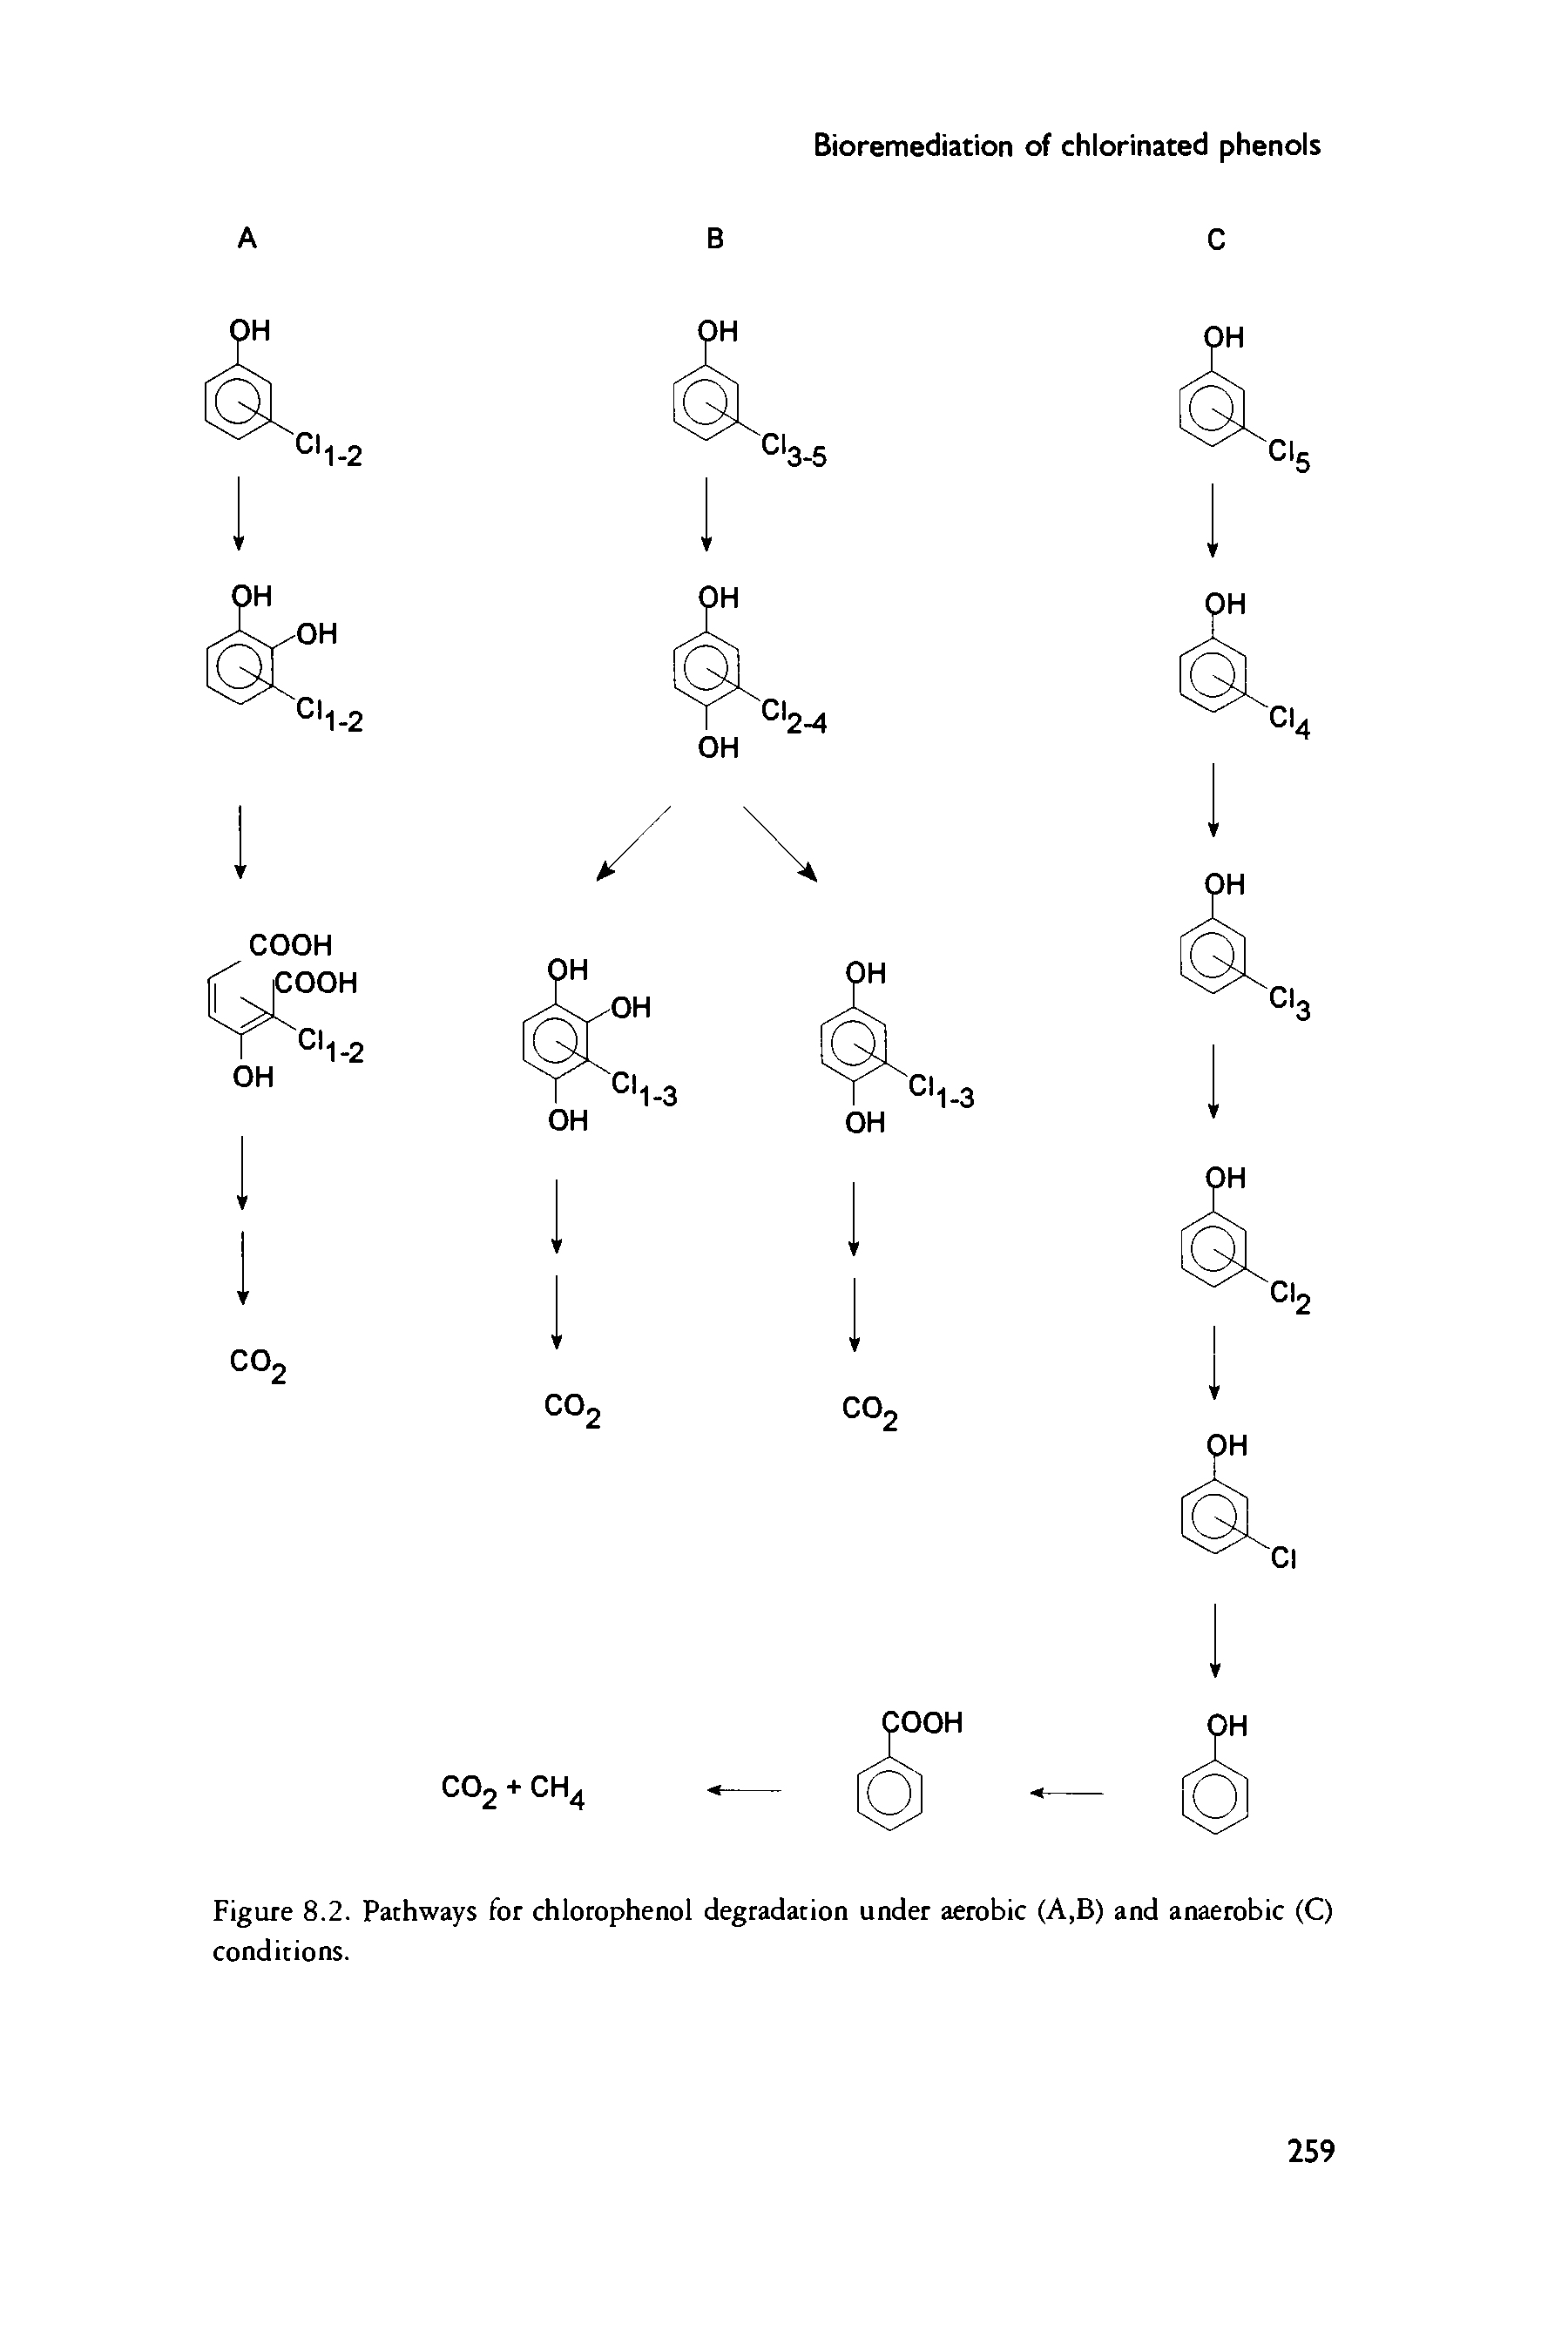 Figure 8.2. Pathways for chlorophenol degradation under aerobic (A,B) and anaerobic (C) conditions.